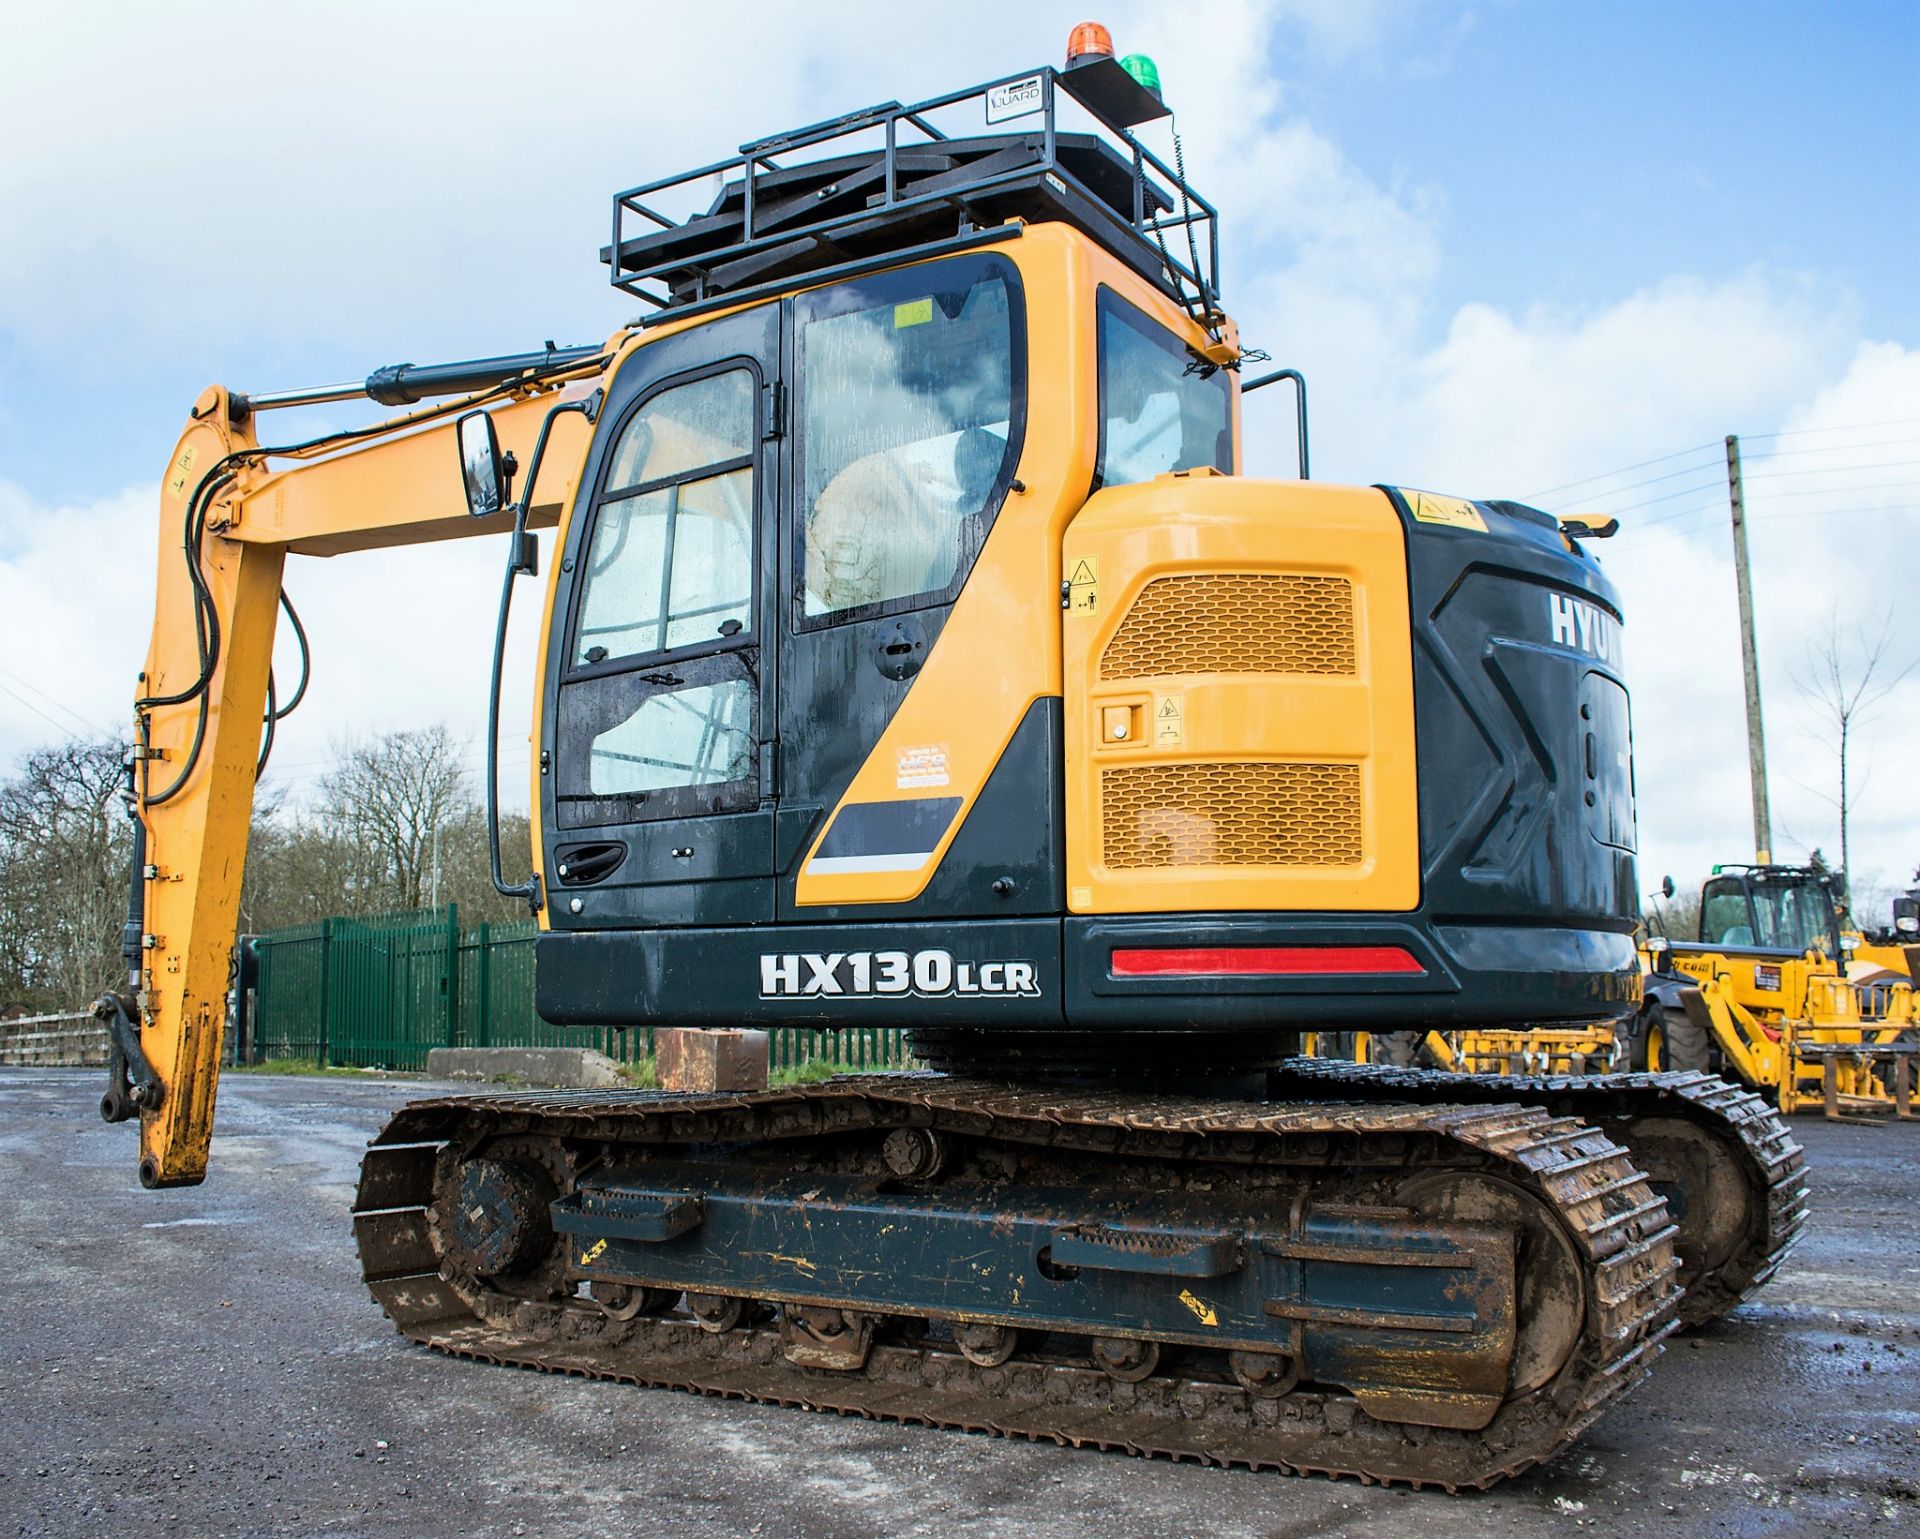 Hyundai HX130 LCR 13 tonne steel tracked excavator Year: 2018 S/N: J0000009 Recorded Hours: 674 - Image 3 of 13